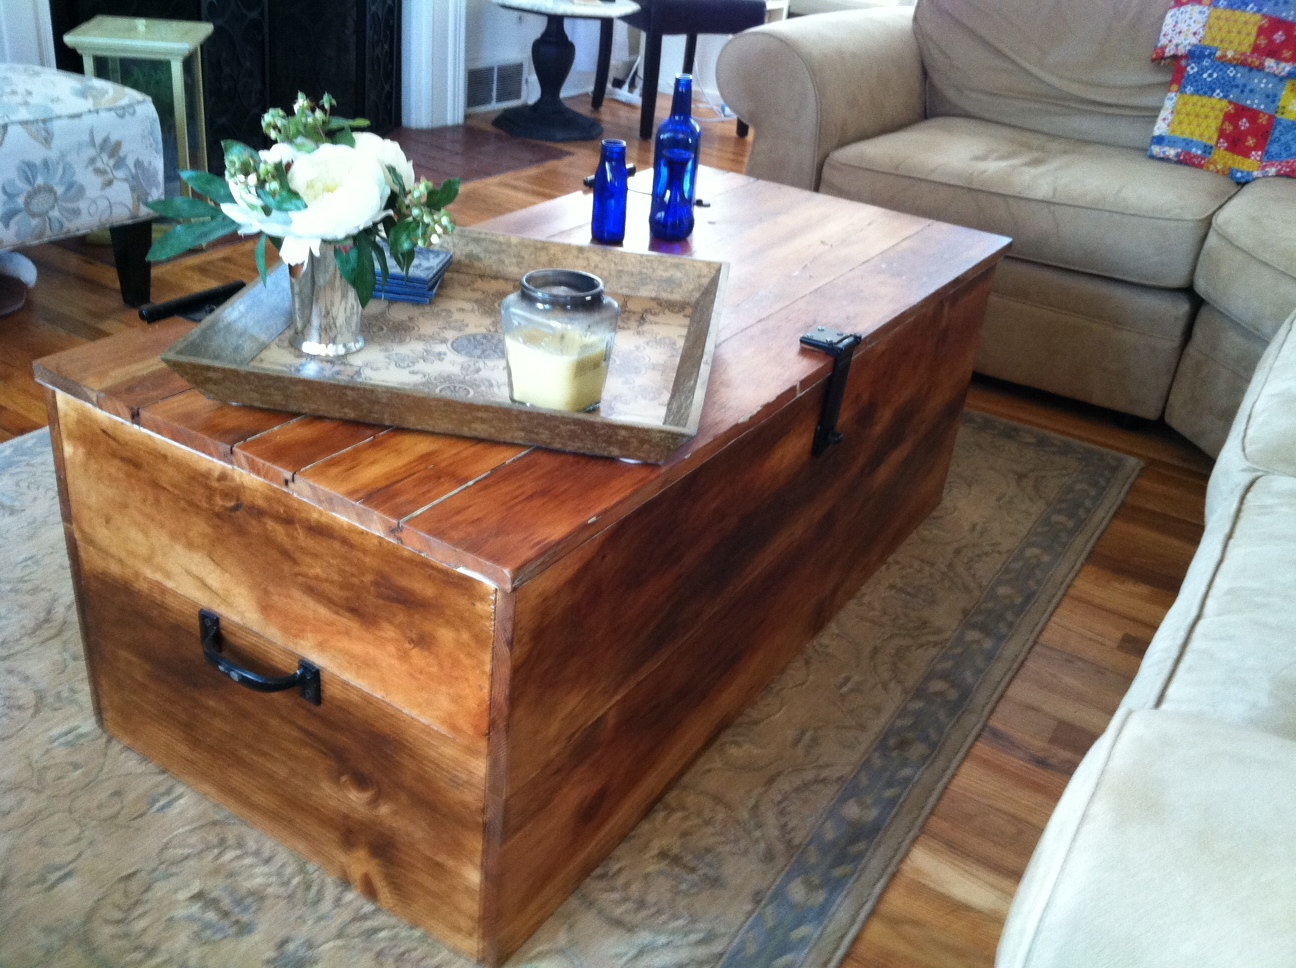 Wood shipping crate coffee table